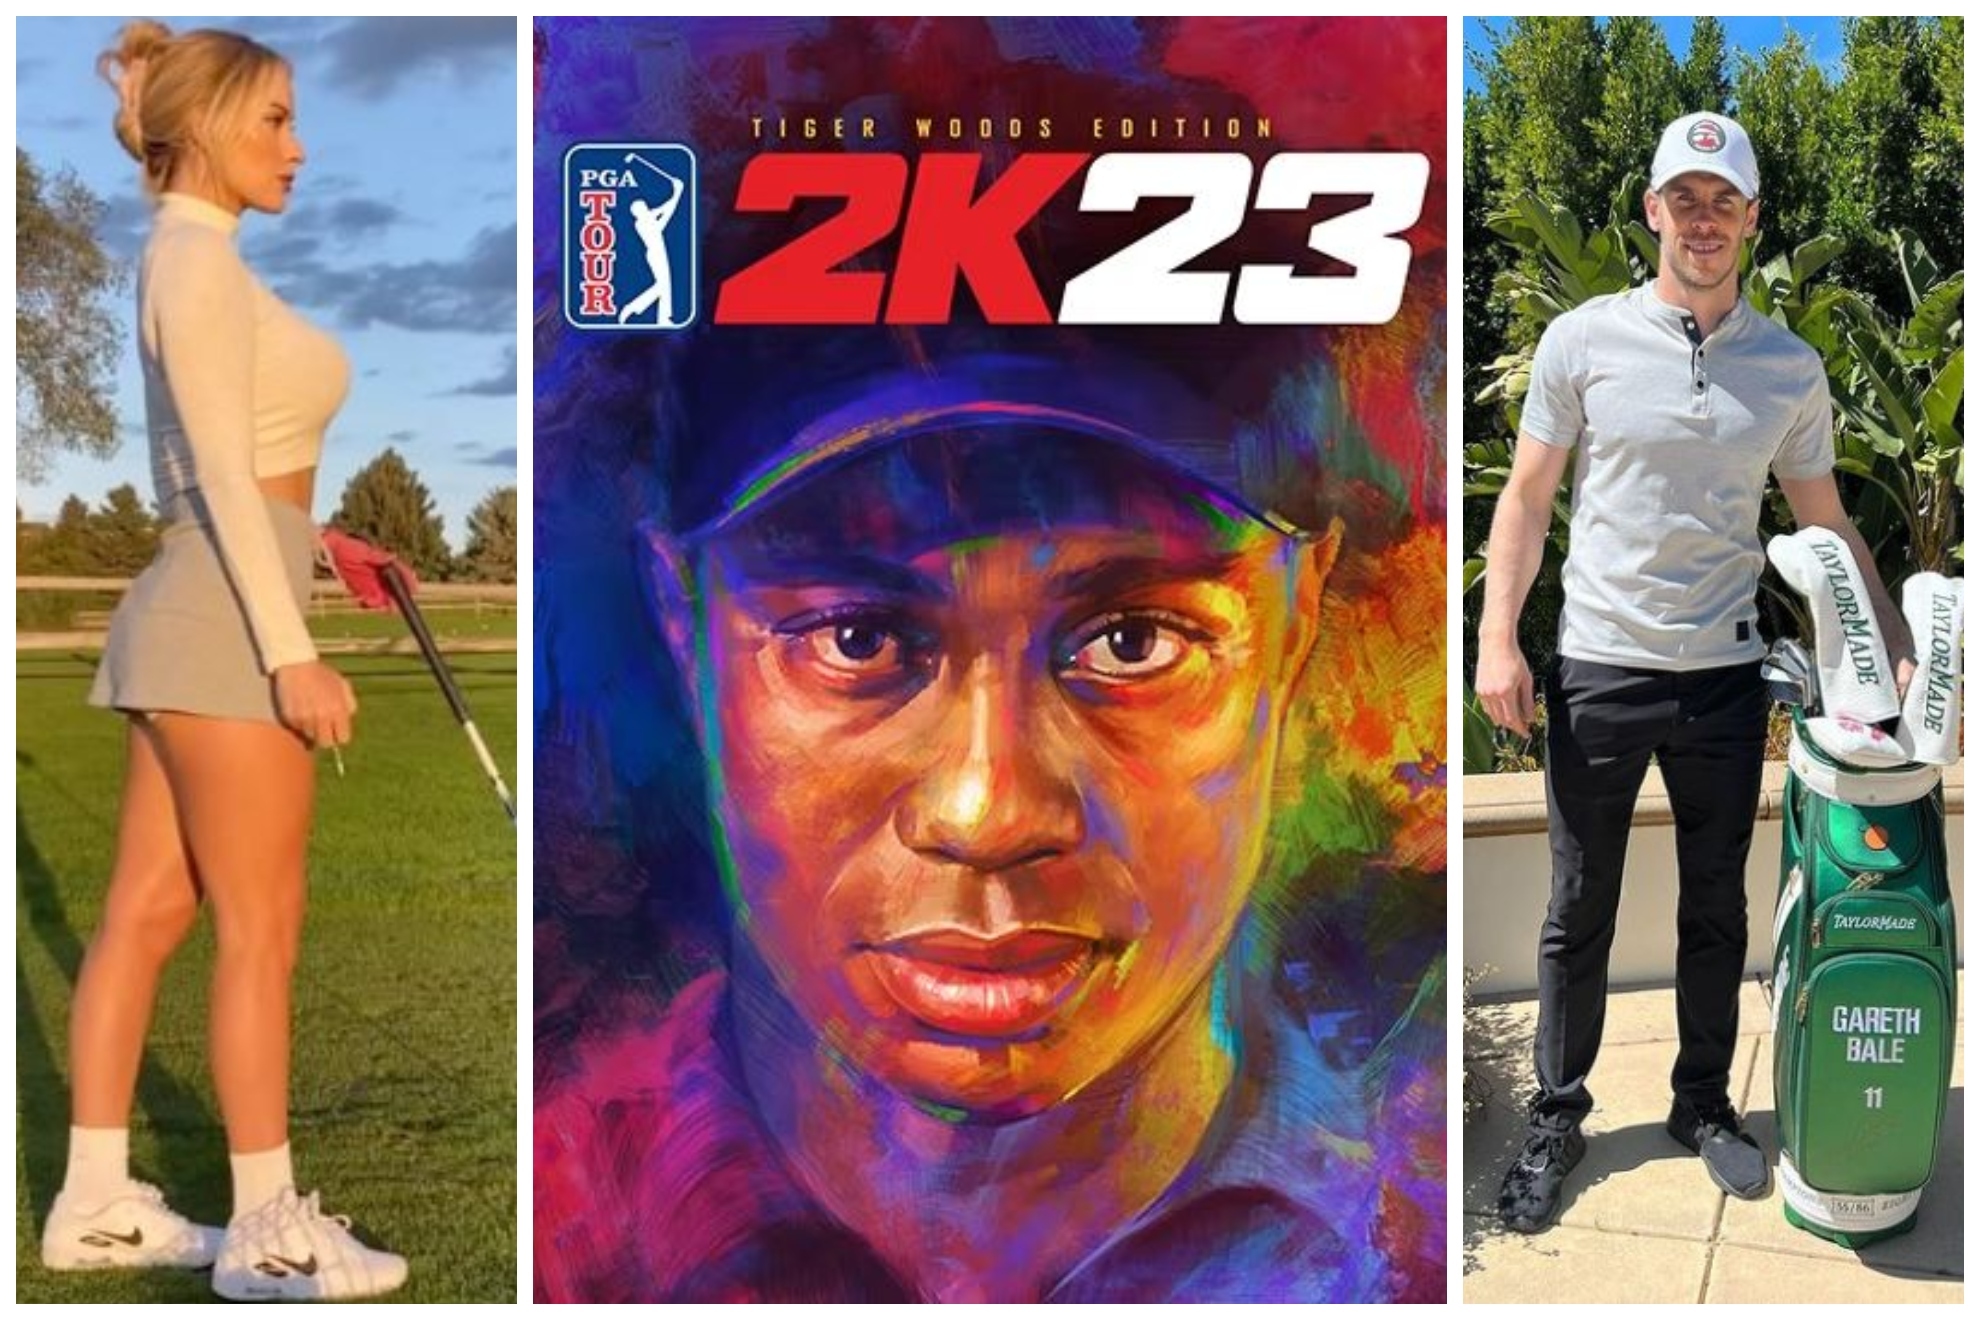 Paige Spiranac and Gareth Bale could be added to the PGA Tour 2K23 video game